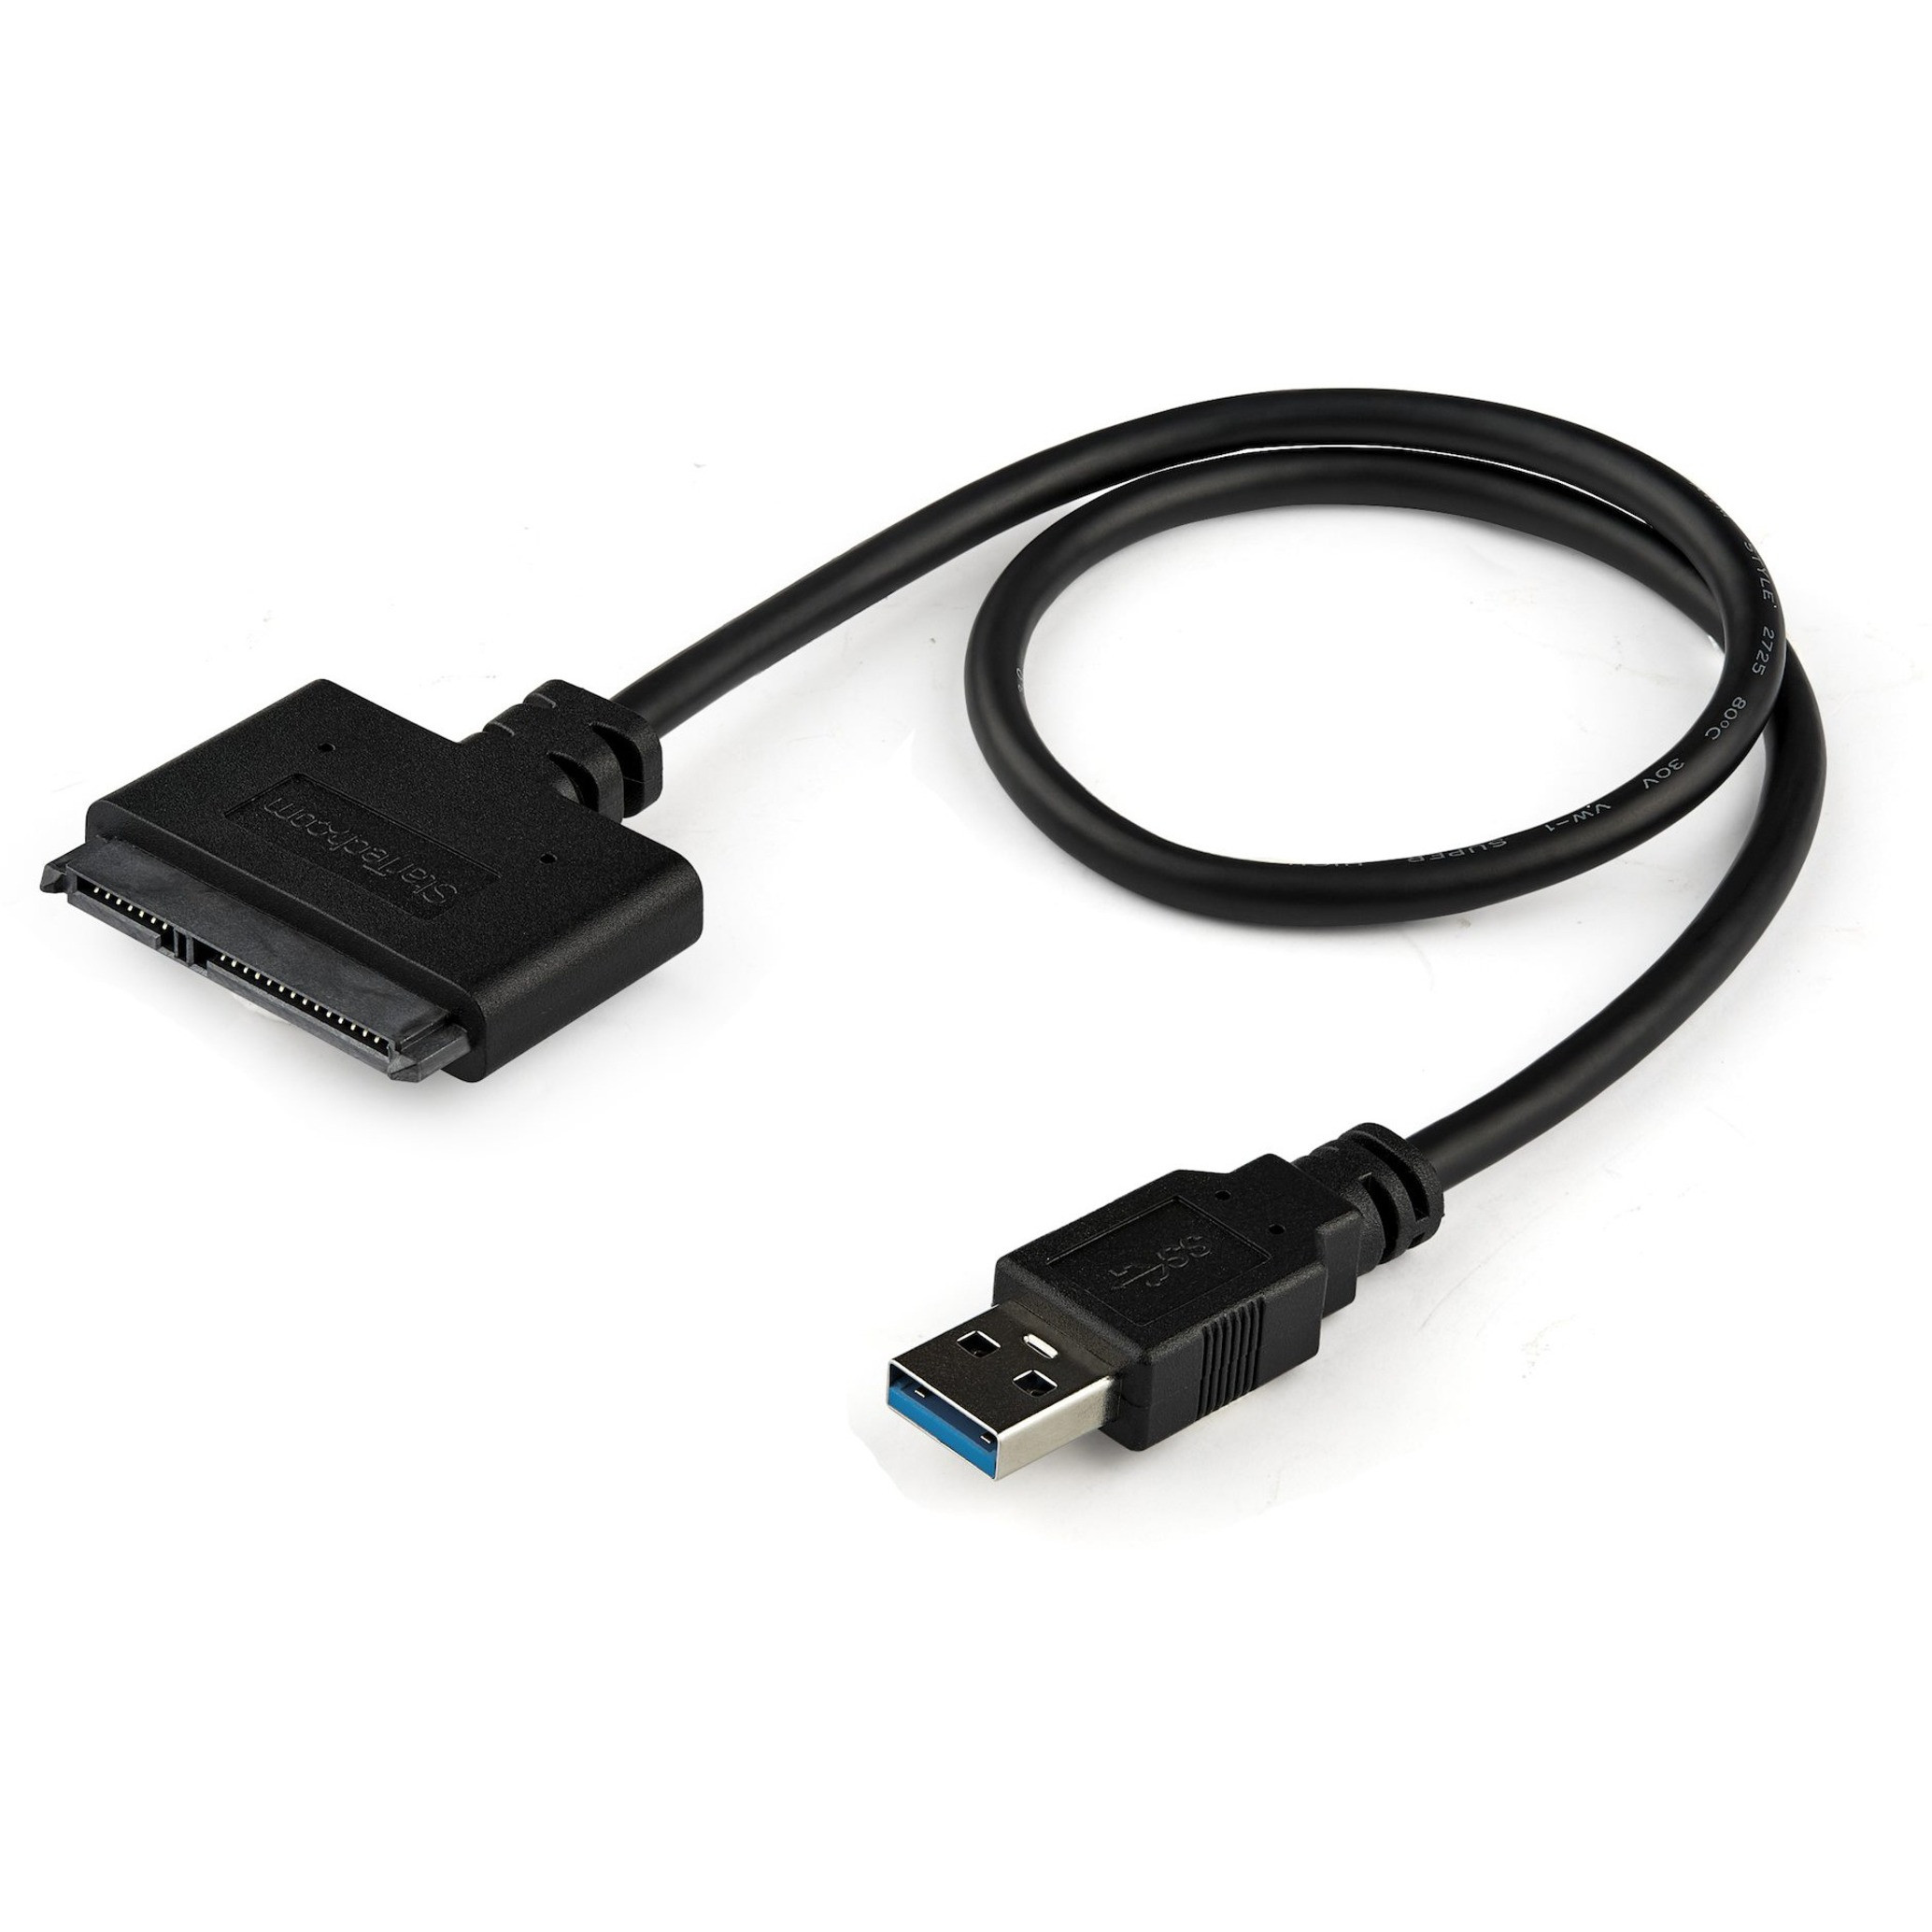 Startech .com USB to 2.5" SATA III Hard Drive Adapter Cable w/ UASPSATA to 3.0 Converter for SSD / HDDQuickly access a SATA 2.... USB3S2SAT3CB - Corporate Armor